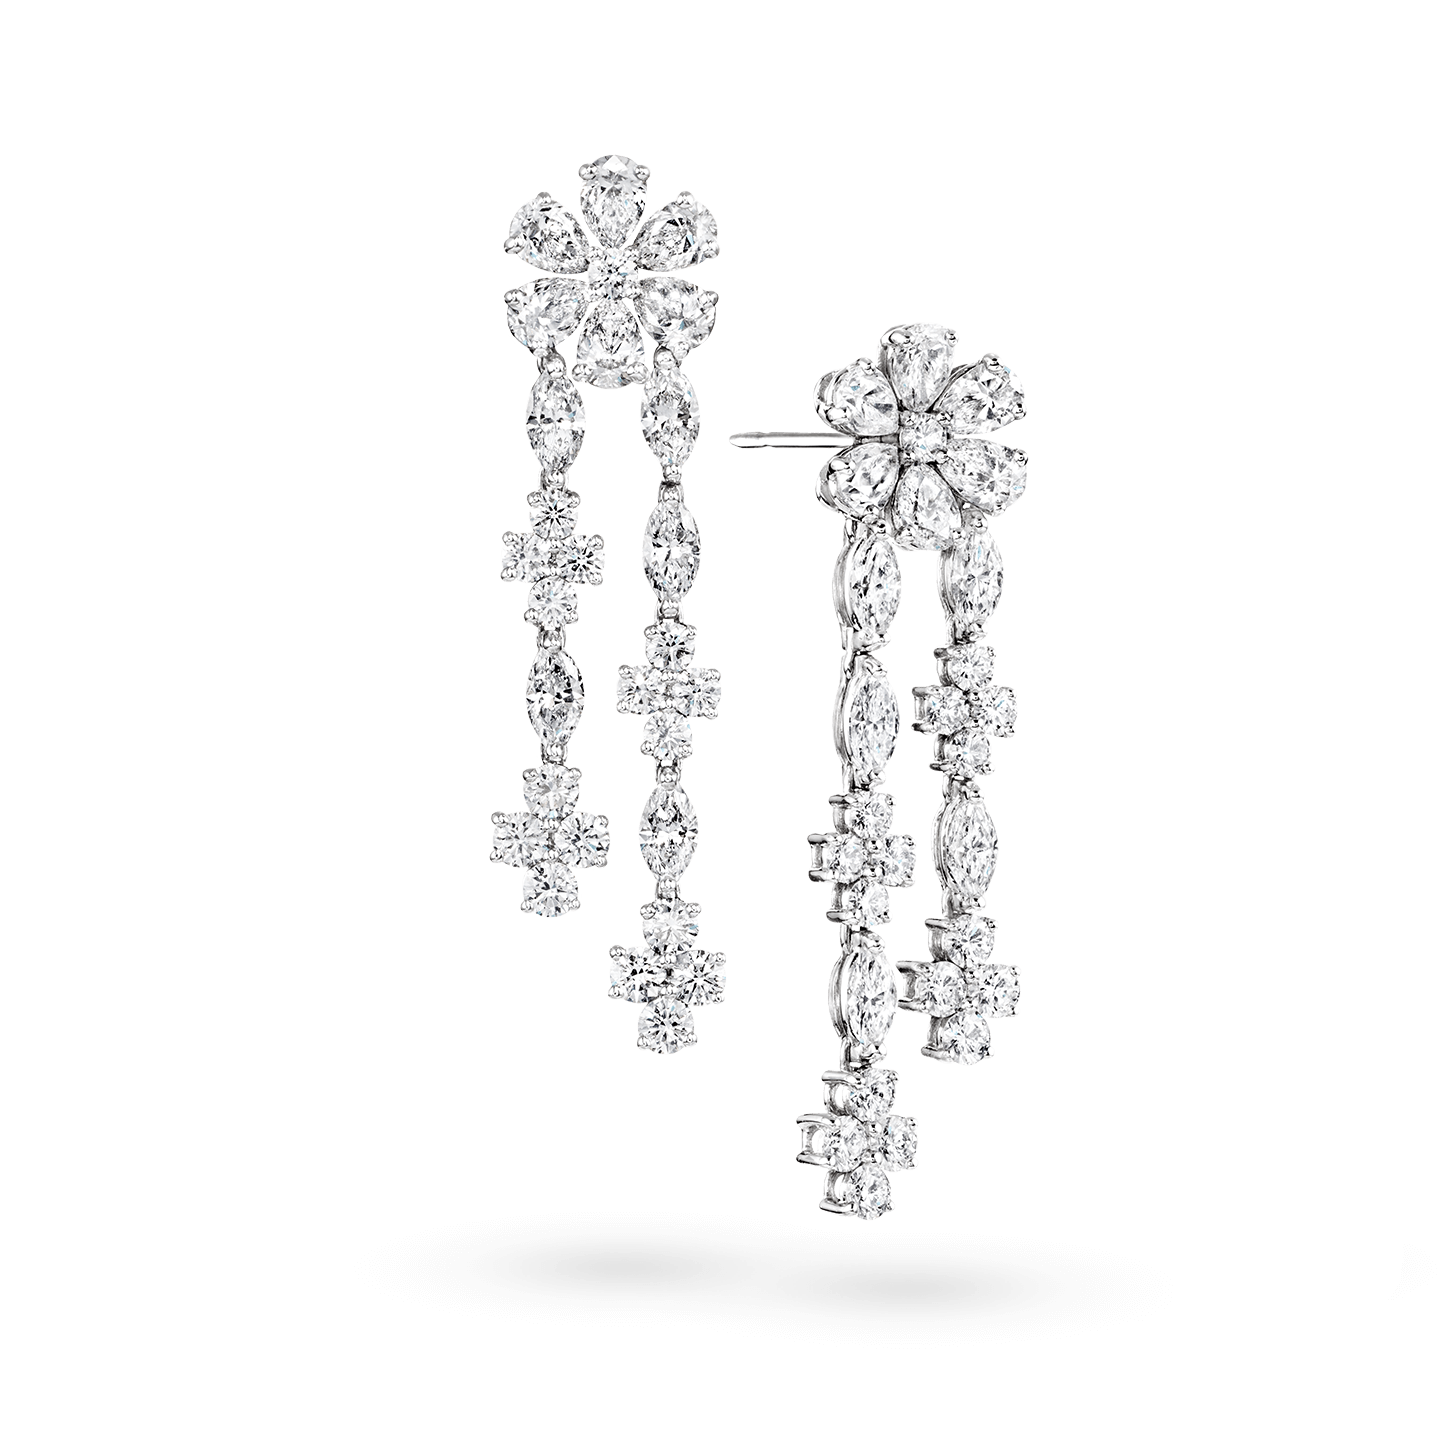 Forget-Me-Not Diamond Drop Earrings, Product Image 2